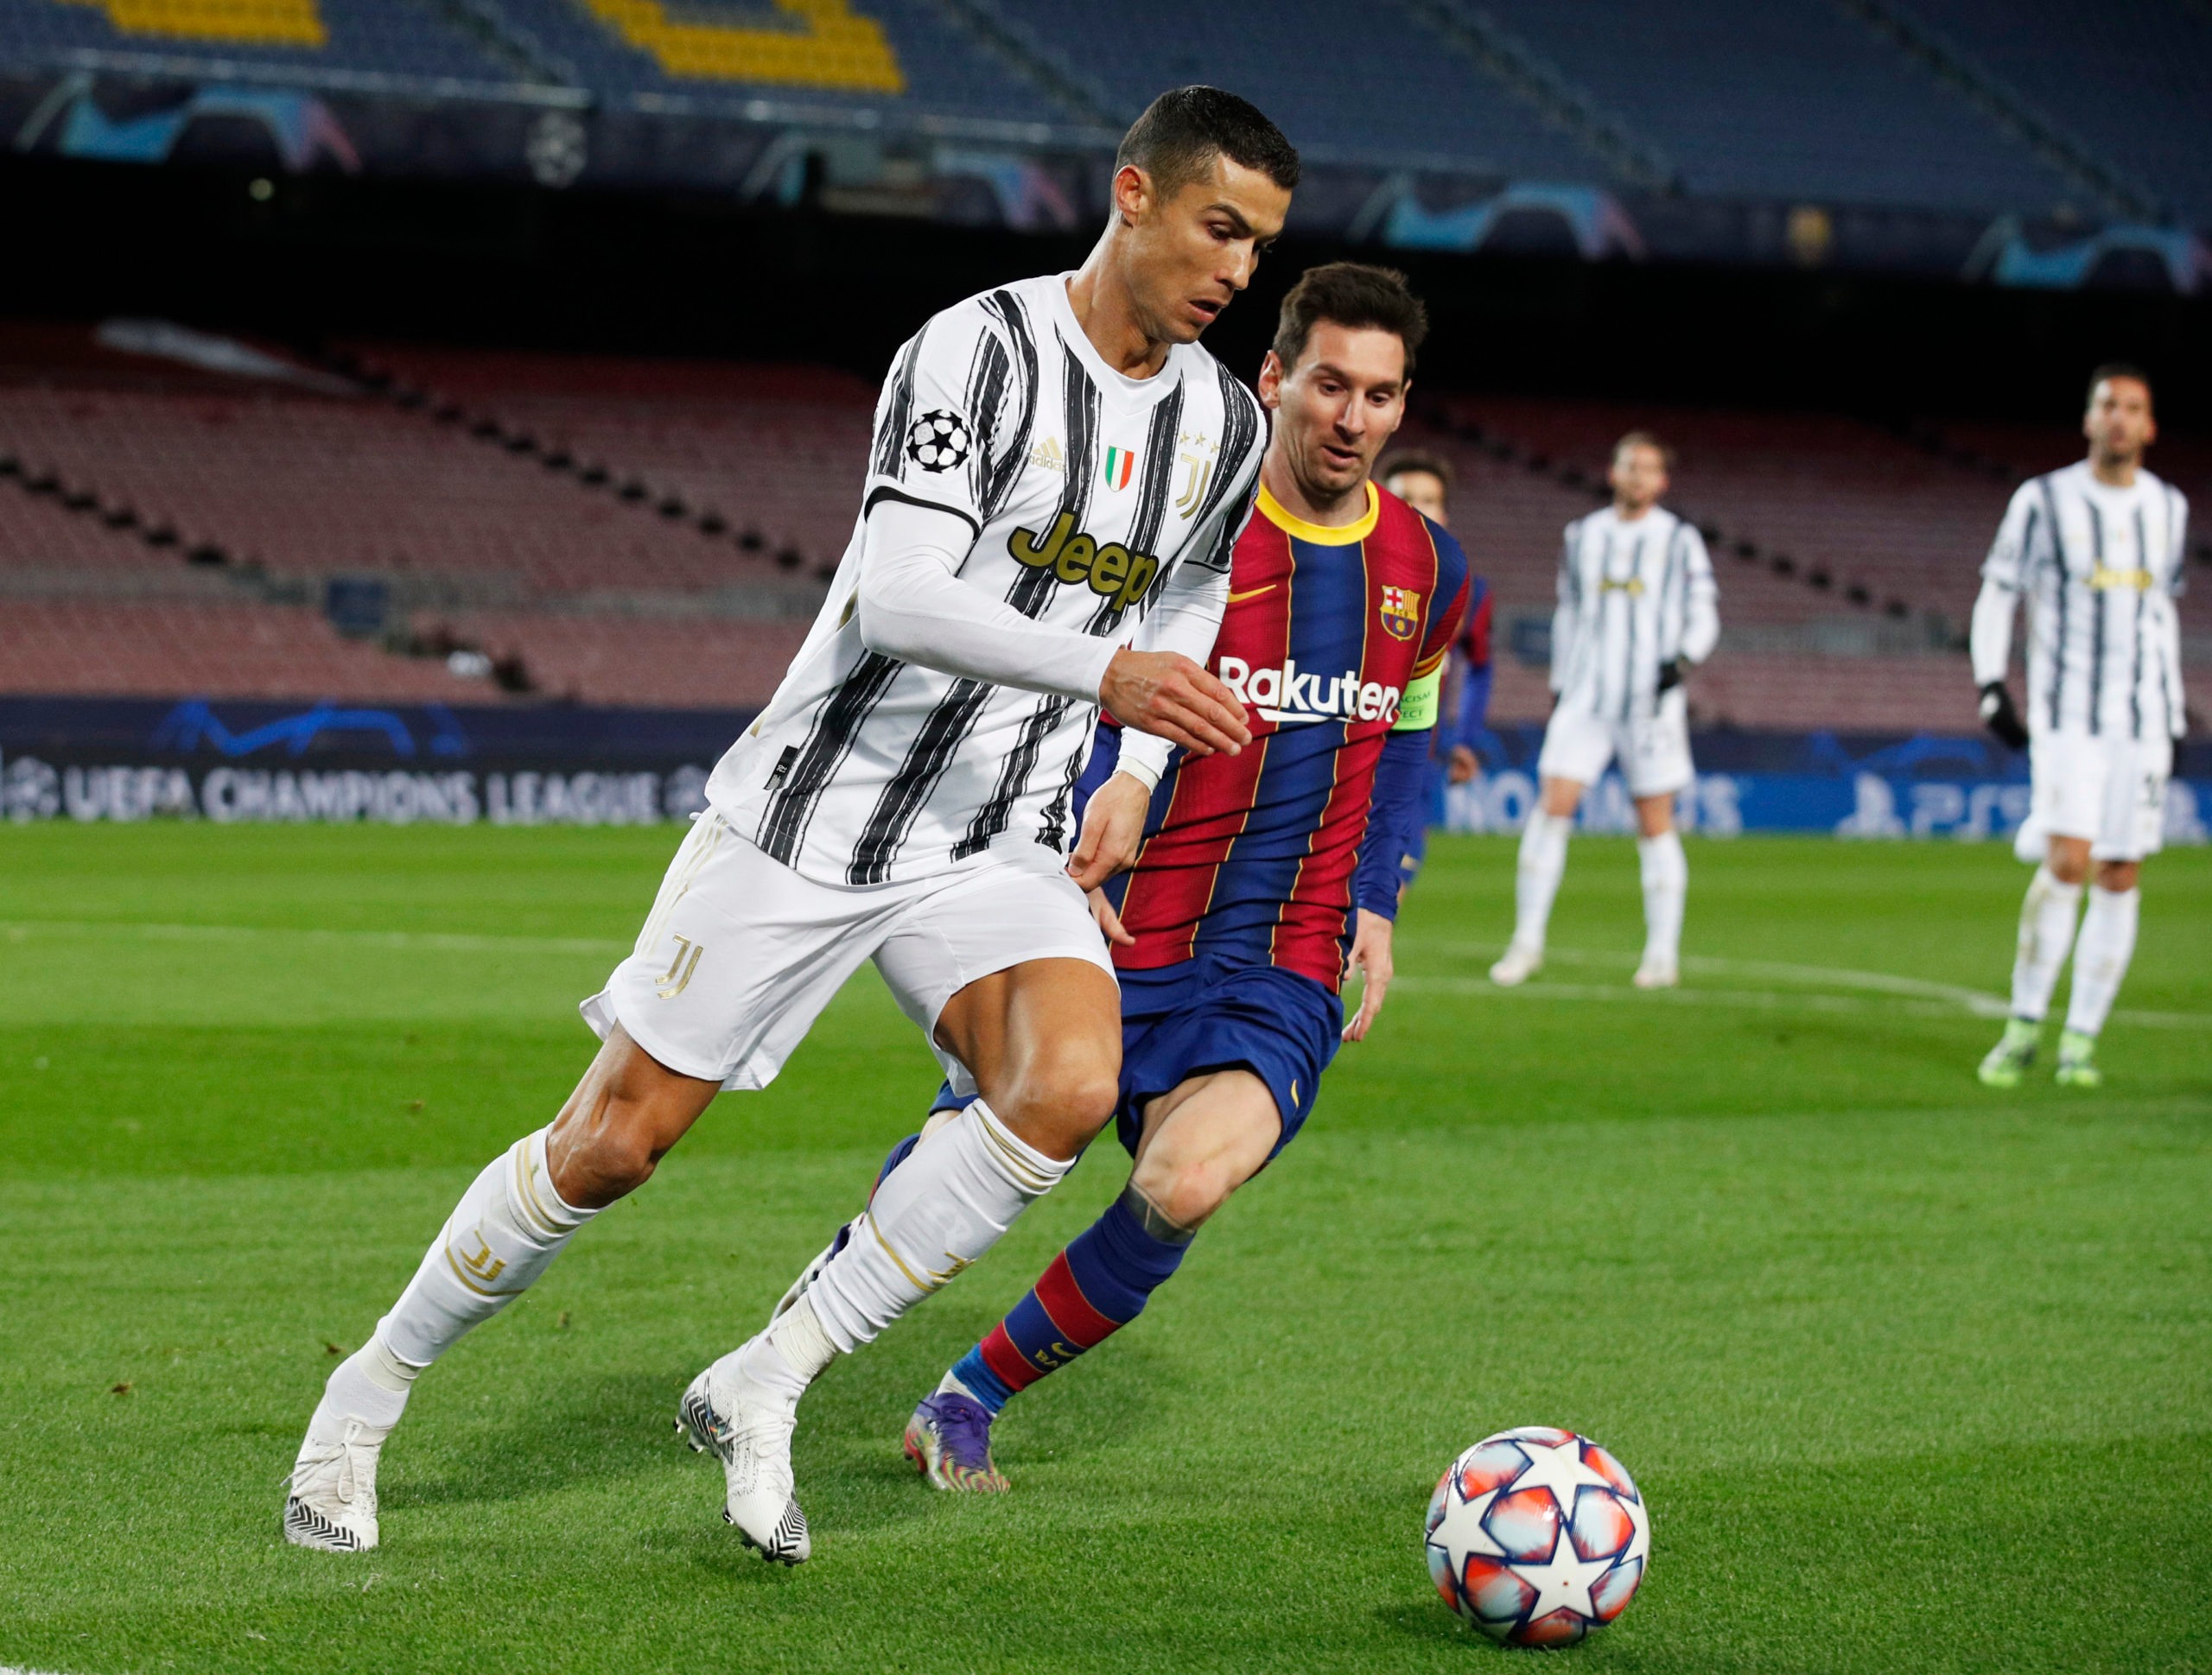 Ronaldo double helps Juve to 3-0 win over Barca - Loveworld UK